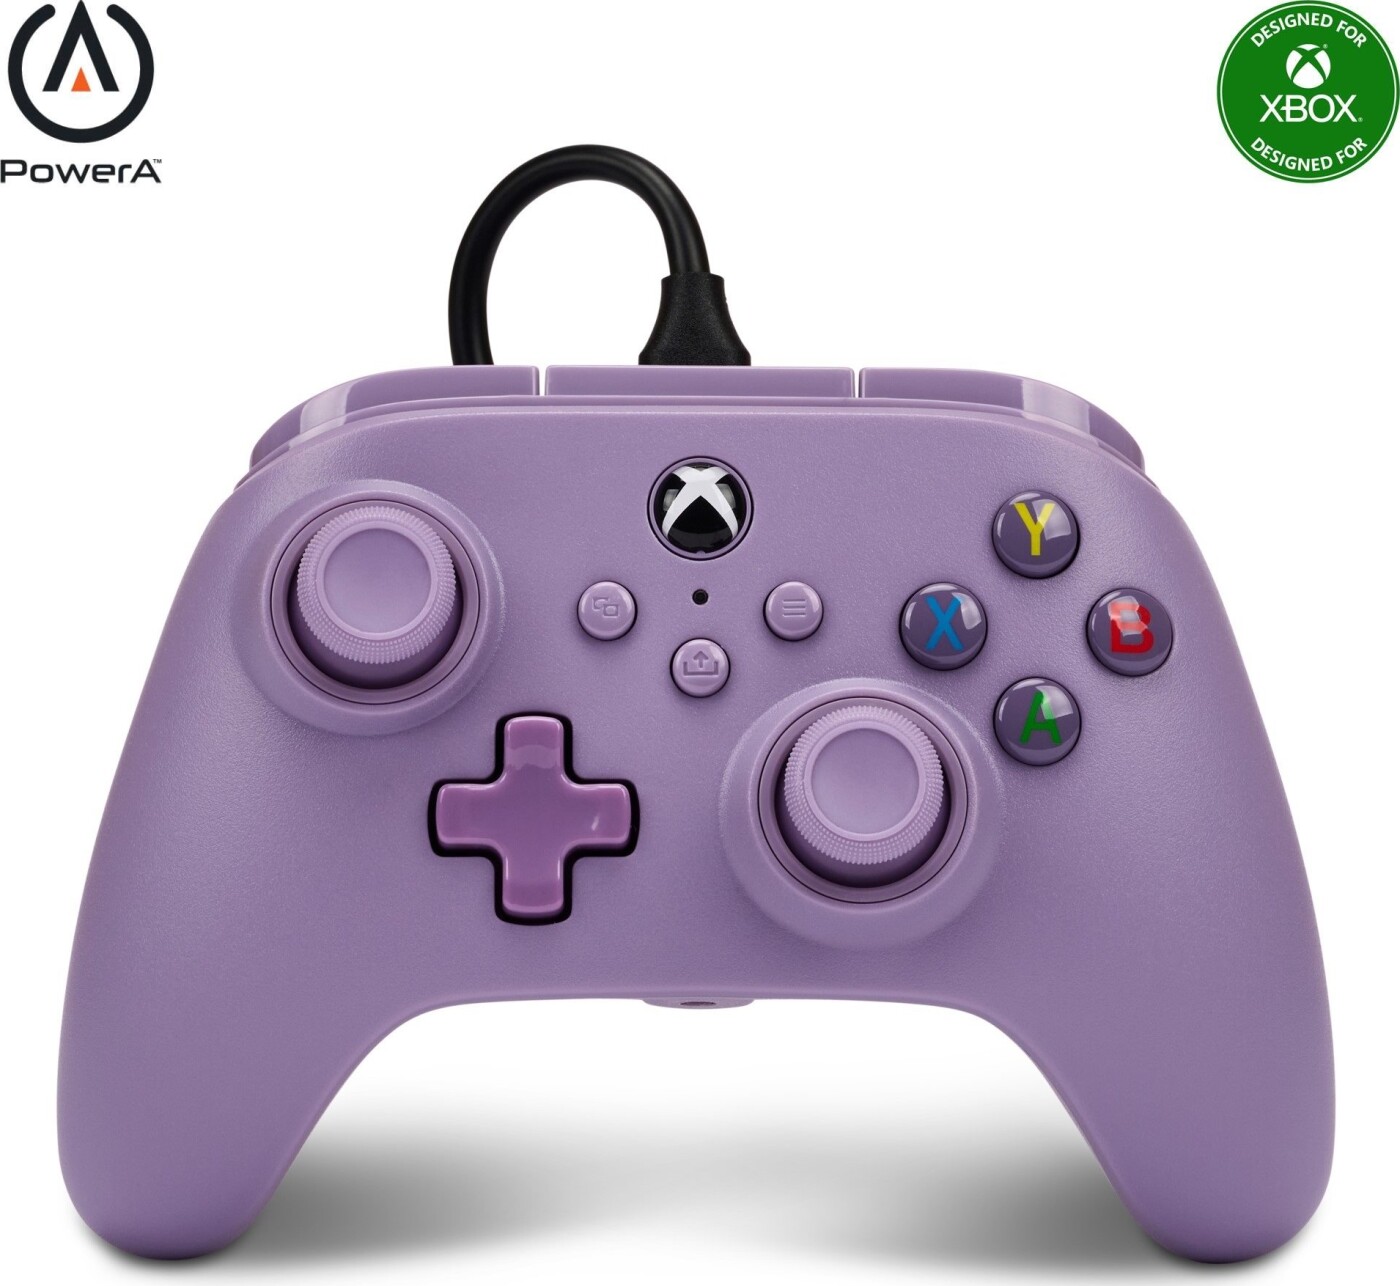 Billede af Powera Nano Enhanced Wired Controller - Xbox Series X/s - Lilac